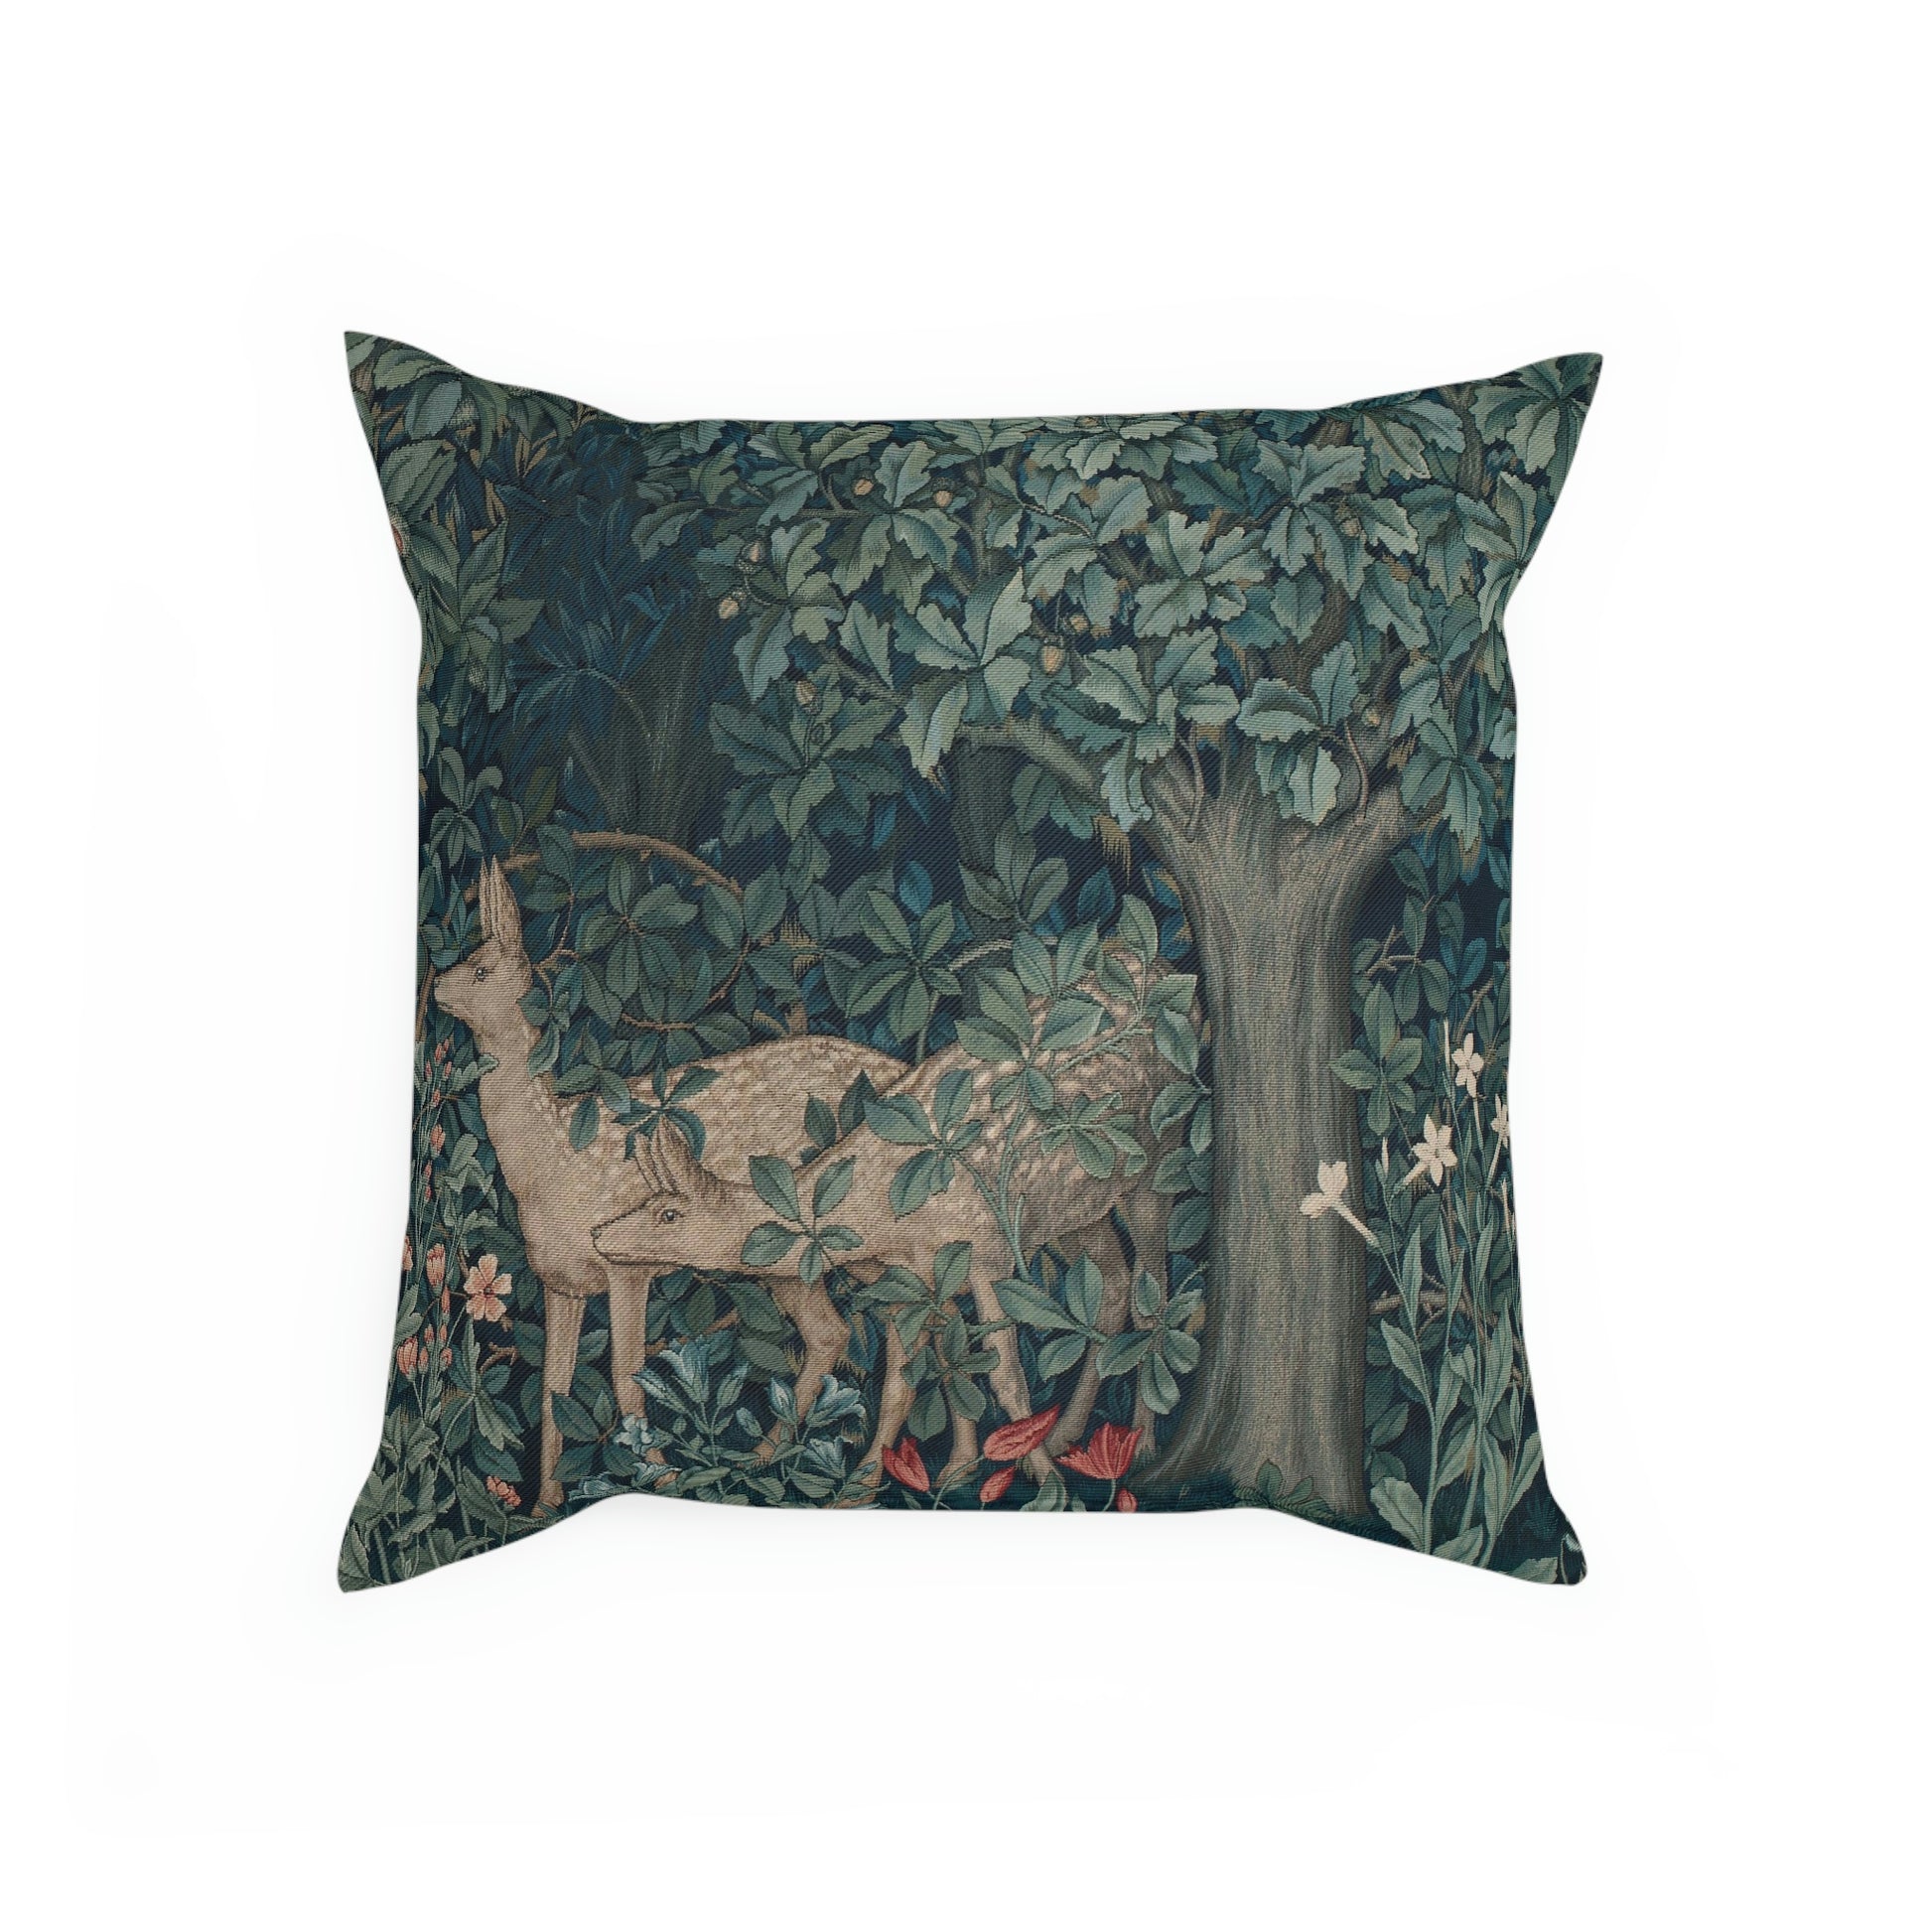 William-Morris-and-Co-Cushion-and-Cushion-Cover-Dear-by-John-Henry-Dearle-Green-Forest-Collection-7